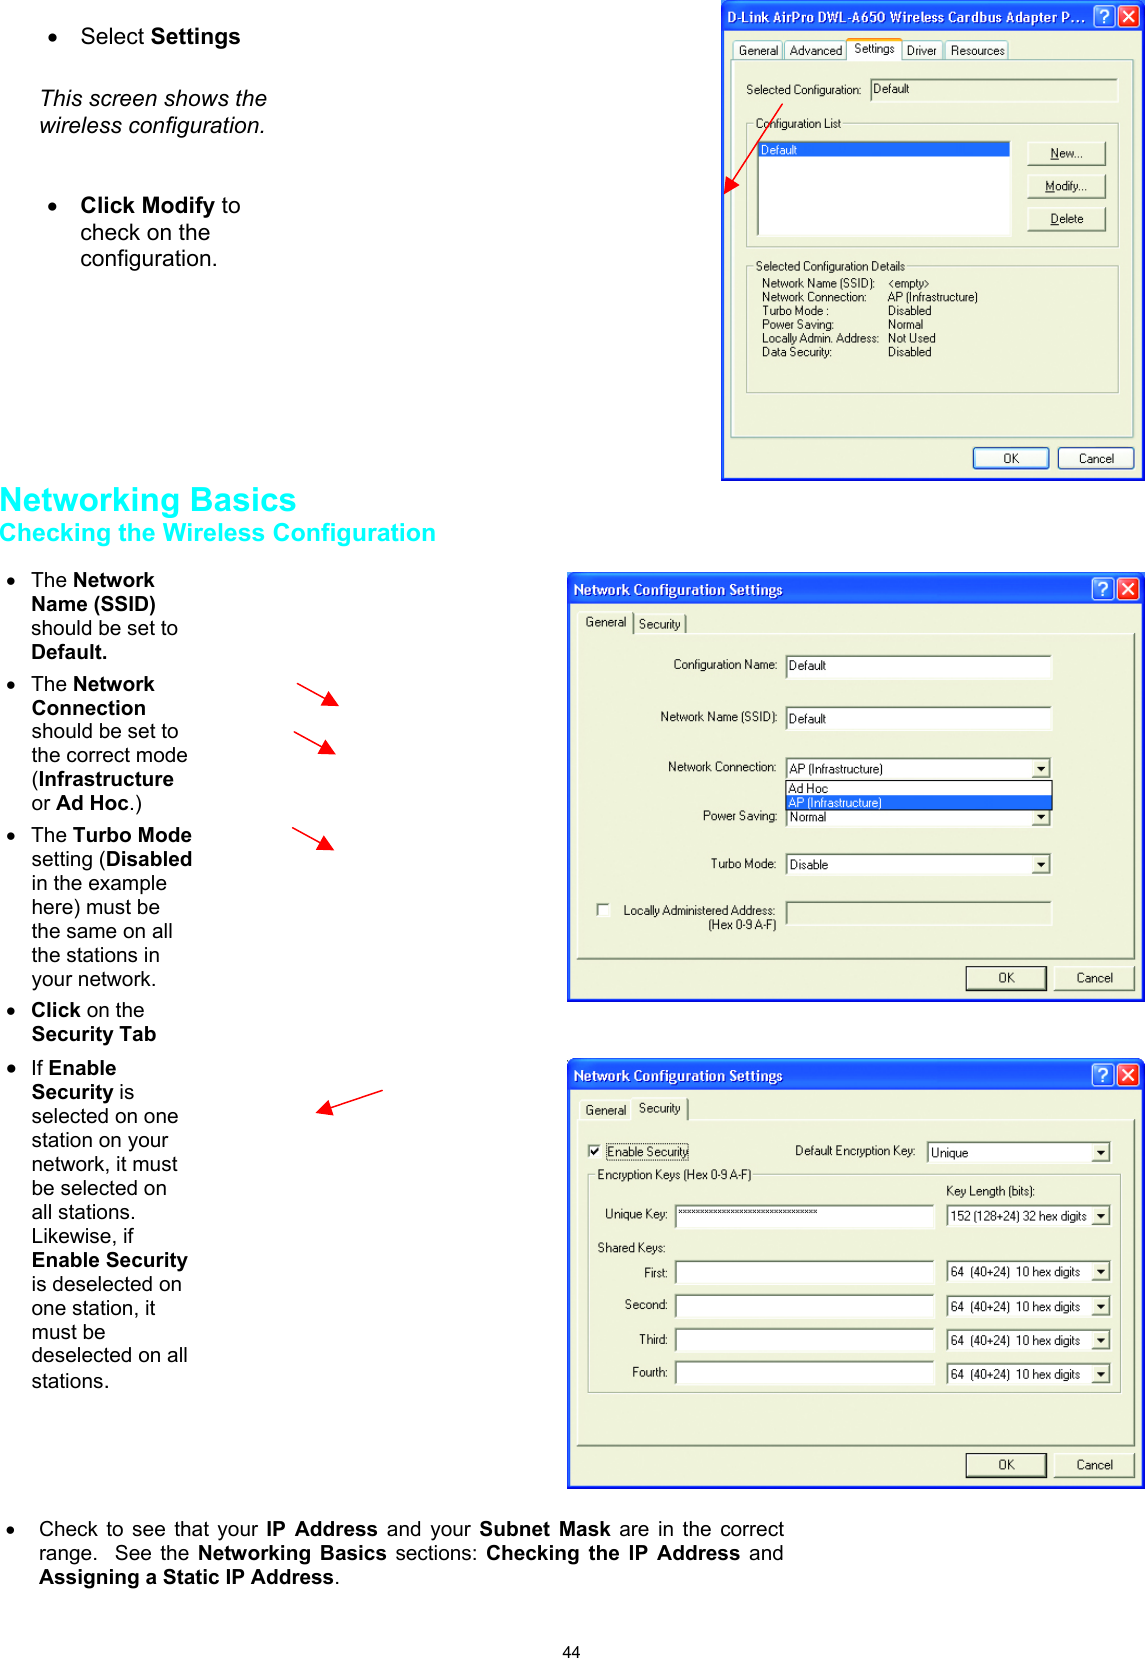 44Networking BasicsChecking the Wireless Configuration • Select SettingsThis screen shows thewireless configuration.• Click Modify tocheck on theconfiguration.• The NetworkName (SSID)should be set toDefault.• The NetworkConnectionshould be set tothe correct mode(Infrastructureor Ad Hoc.)• The Turbo Modesetting (Disabledin the examplehere) must bethe same on allthe stations inyour network.• Click on theSecurity Tab• If EnableSecurity isselected on onestation on yournetwork, it mustbe selected onall stations.Likewise, ifEnable Securityis deselected onone station, itmust bedeselected on allstations.•  Check to see that your IP Address and your Subnet Mask are in the correctrange.  See the Networking Basics sections: Checking the IP Address andAssigning a Static IP Address.